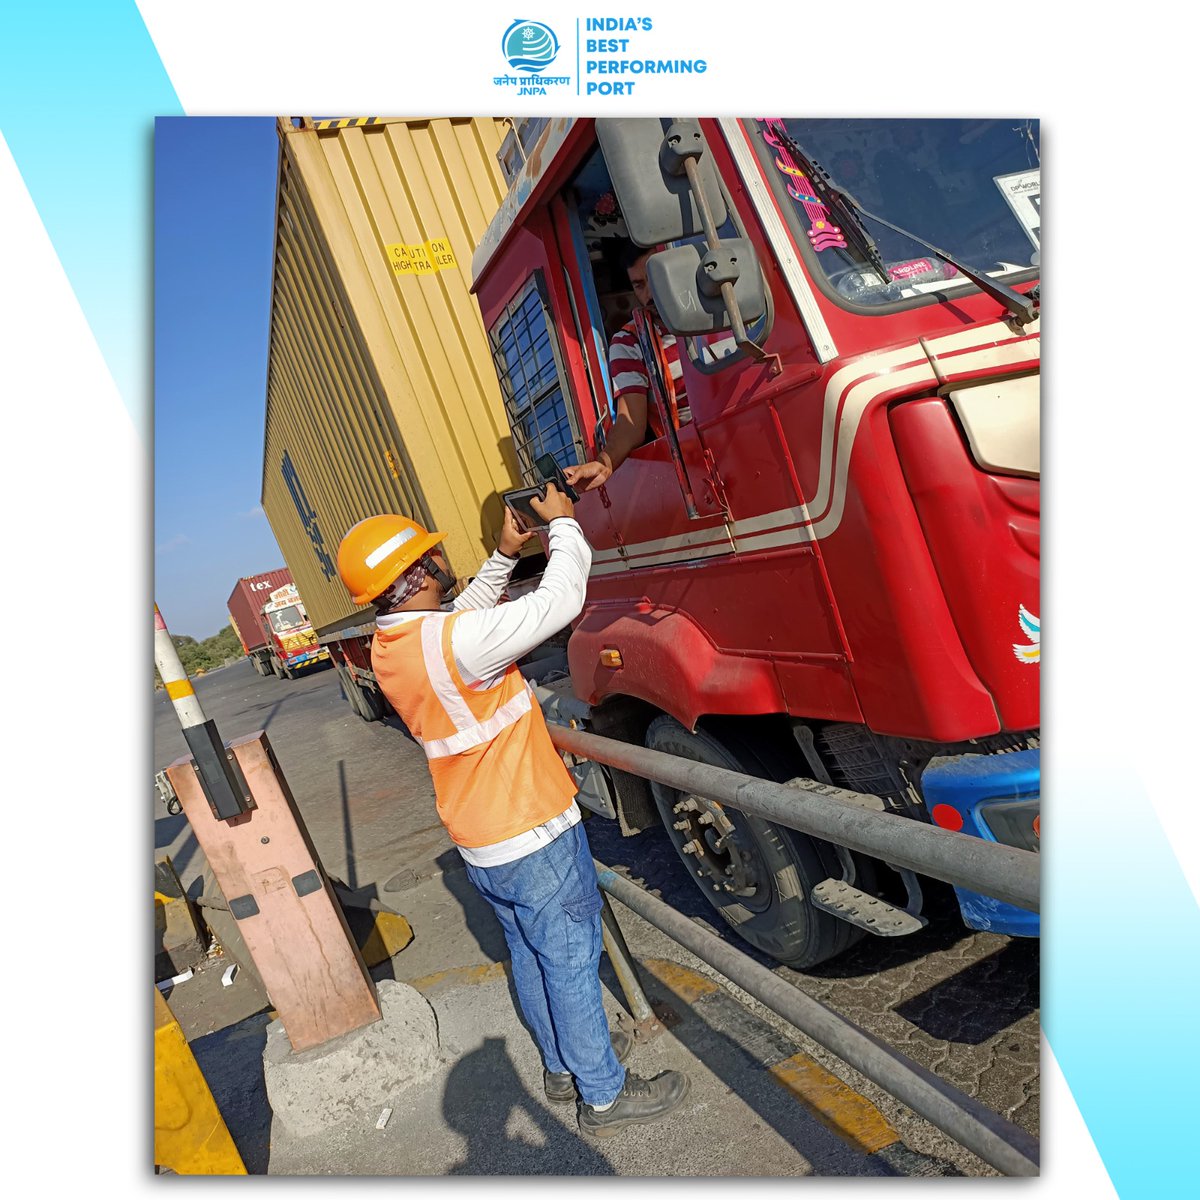 A Year of Digital Progress! JNPA celebrates the 1st anniversary of introducing the online system of Port Driving Permit (PDP) for container tractor-trailer drivers on May 8th, 2023. Congratulations to all those who worked hard behind this. This system has reduced paperwork,…